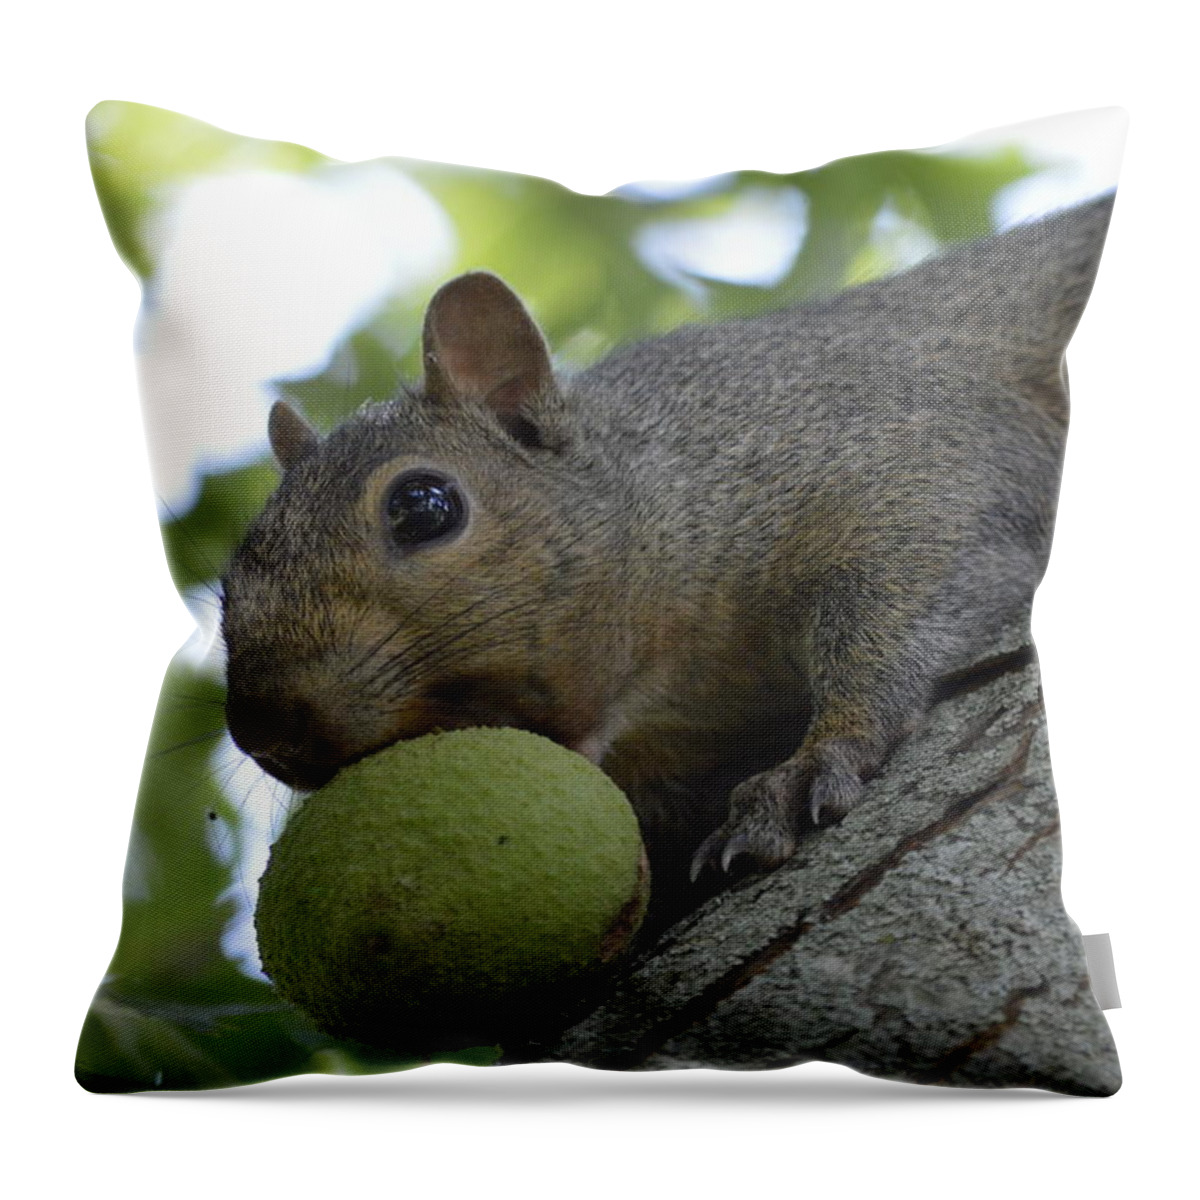 Squirrel Throw Pillow featuring the photograph My Ball by Bonfire Photography